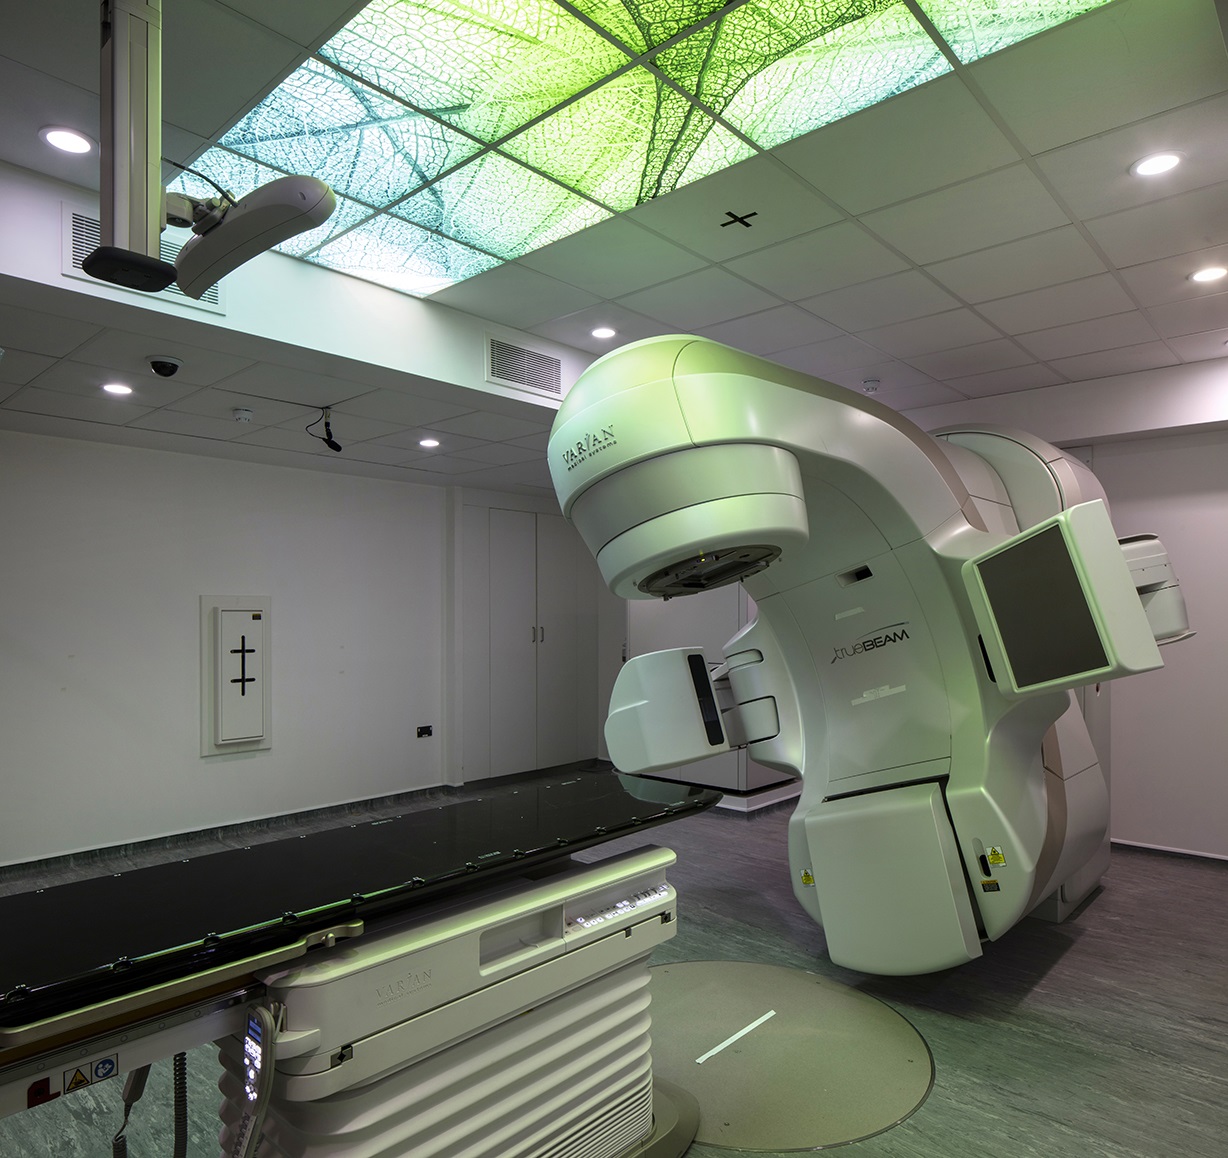 Technology is forever changing, so cancer centres need to be designed to be flexible